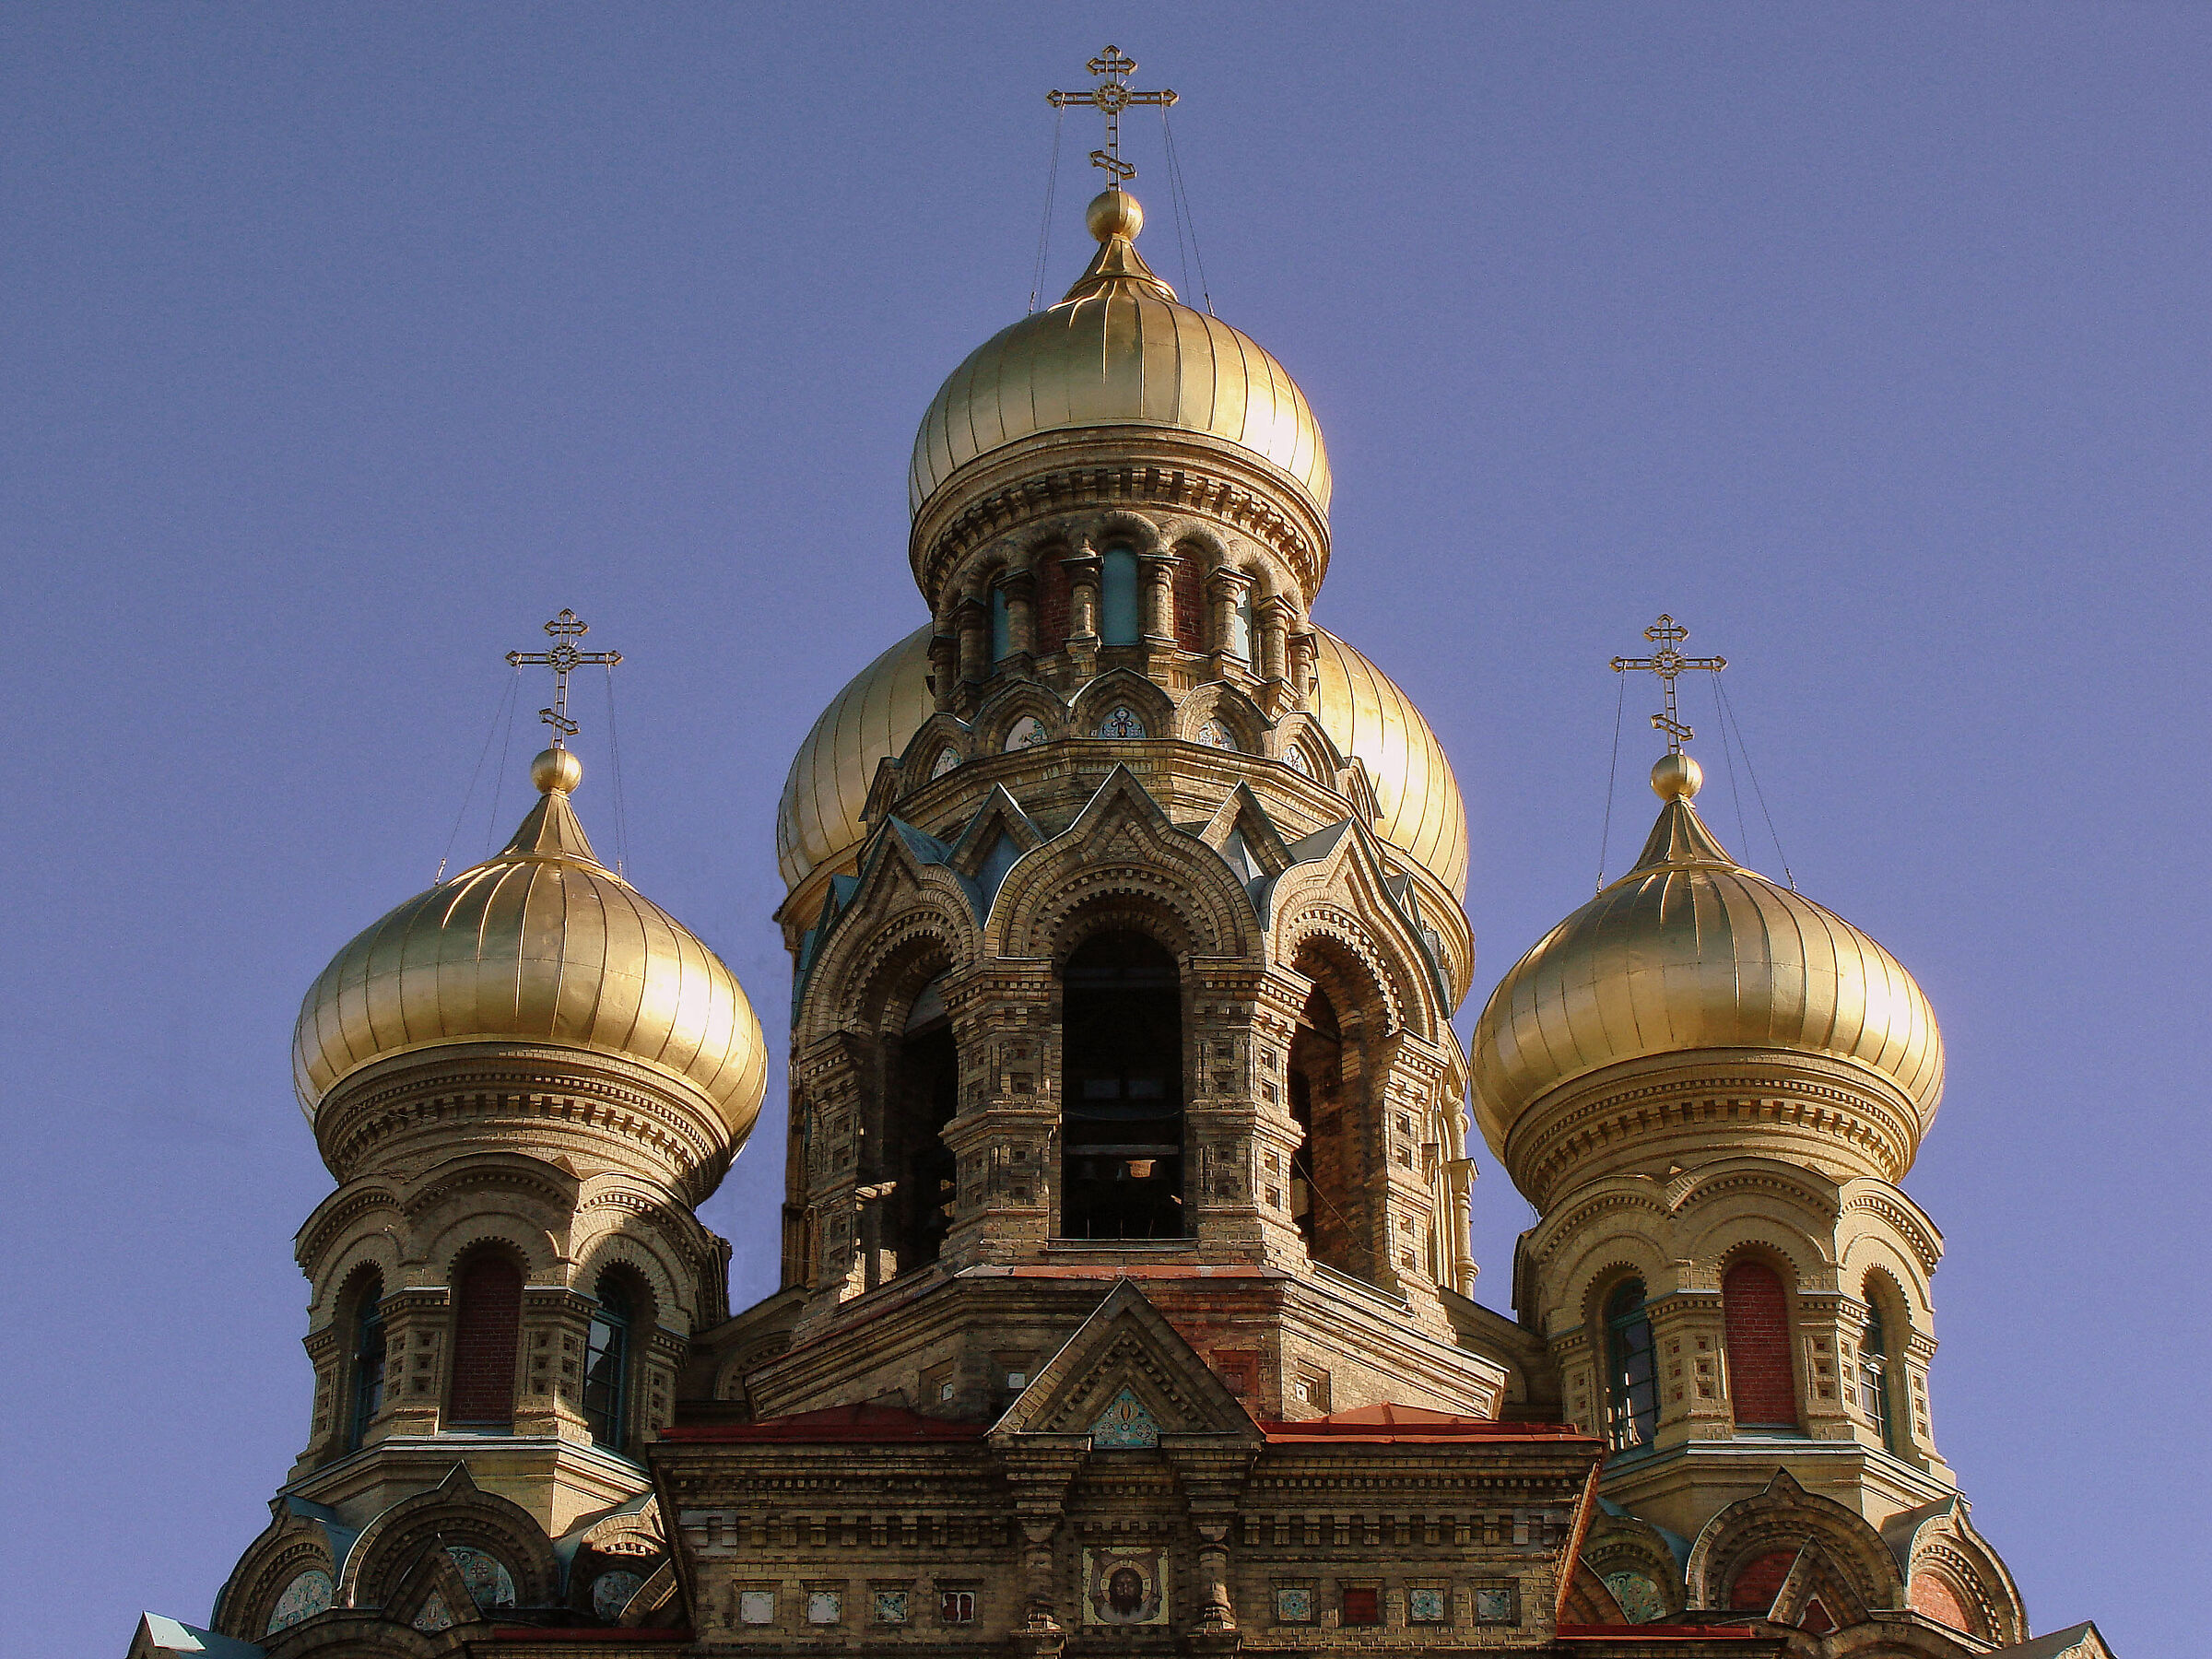 The domes of the Russian church...